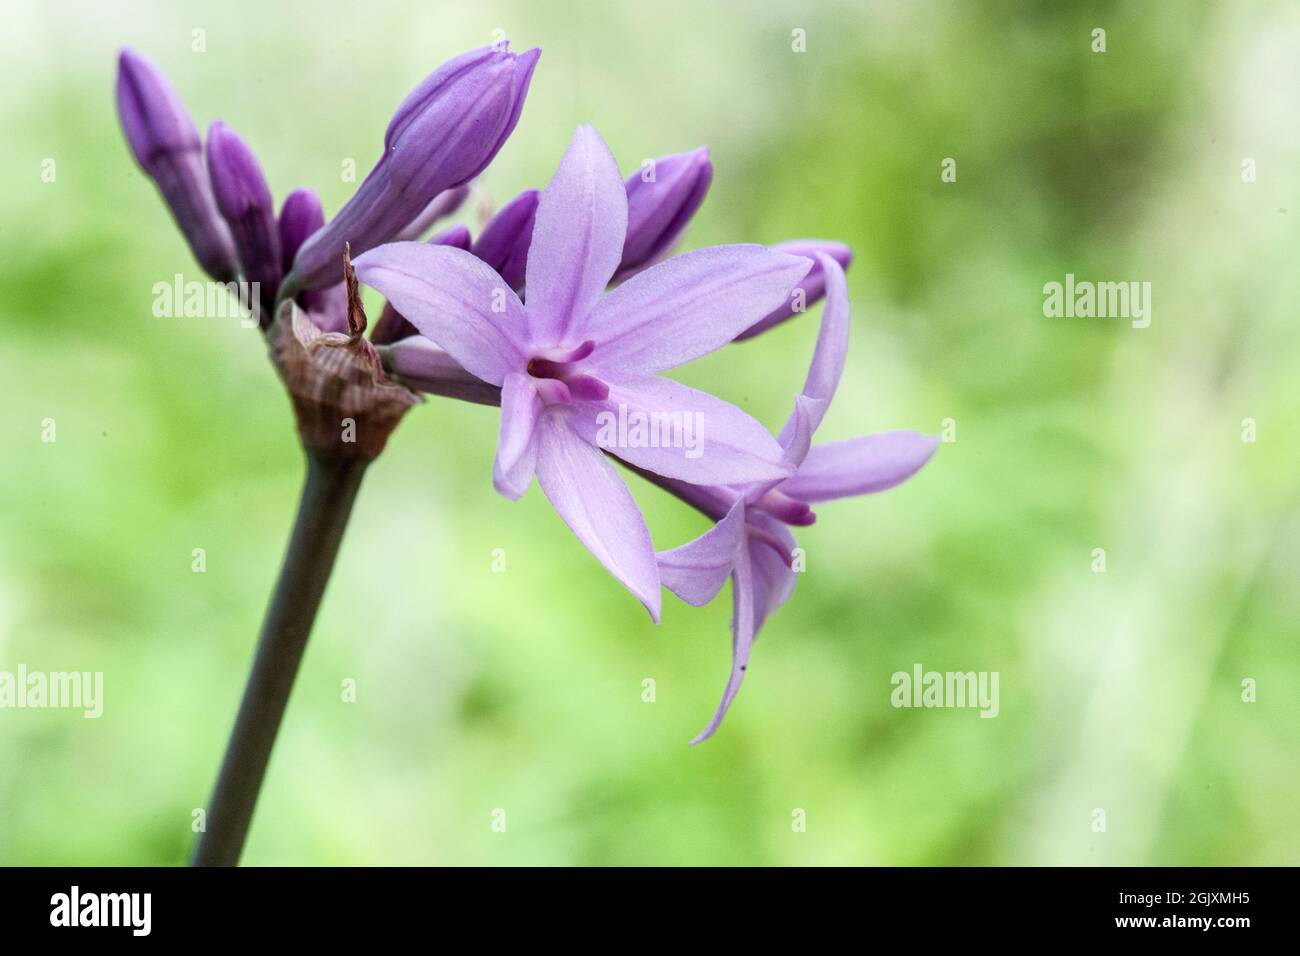 'Tulbaghia violacea'  or society garlic, wild garlic, sweet garlic, spring bulbs, is a flowering plant in the family Amaryllidaceae Stock Photo